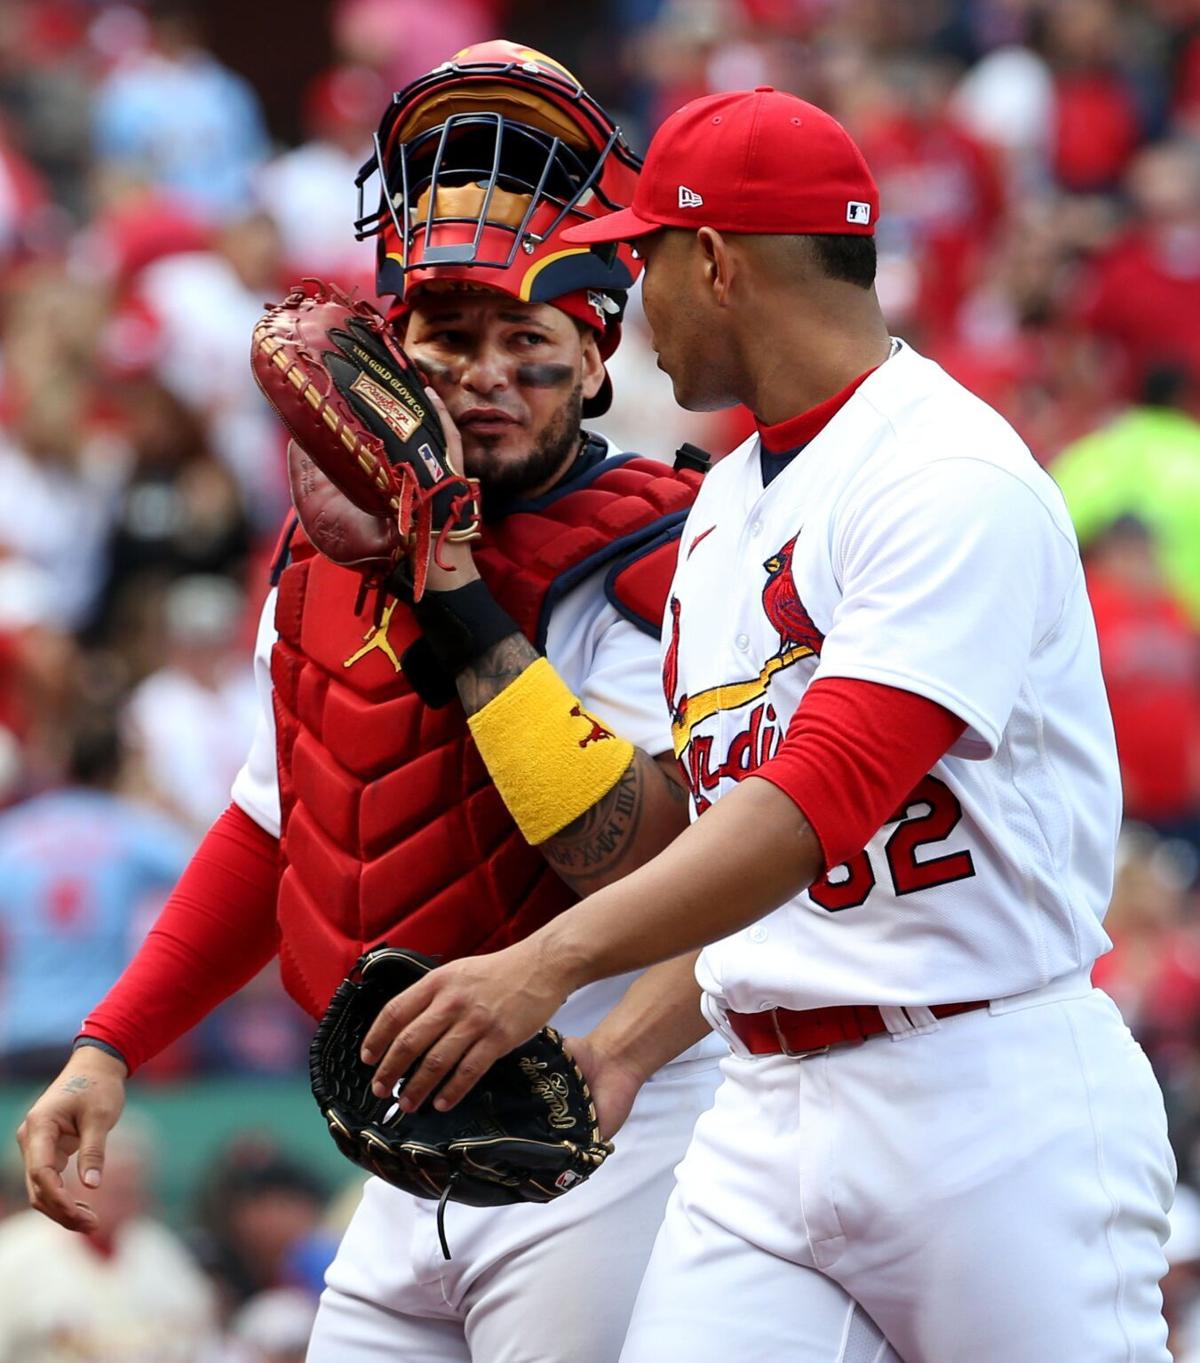 Cardinals' Ryan Helsley to sit Game 2 after experiencing numbness